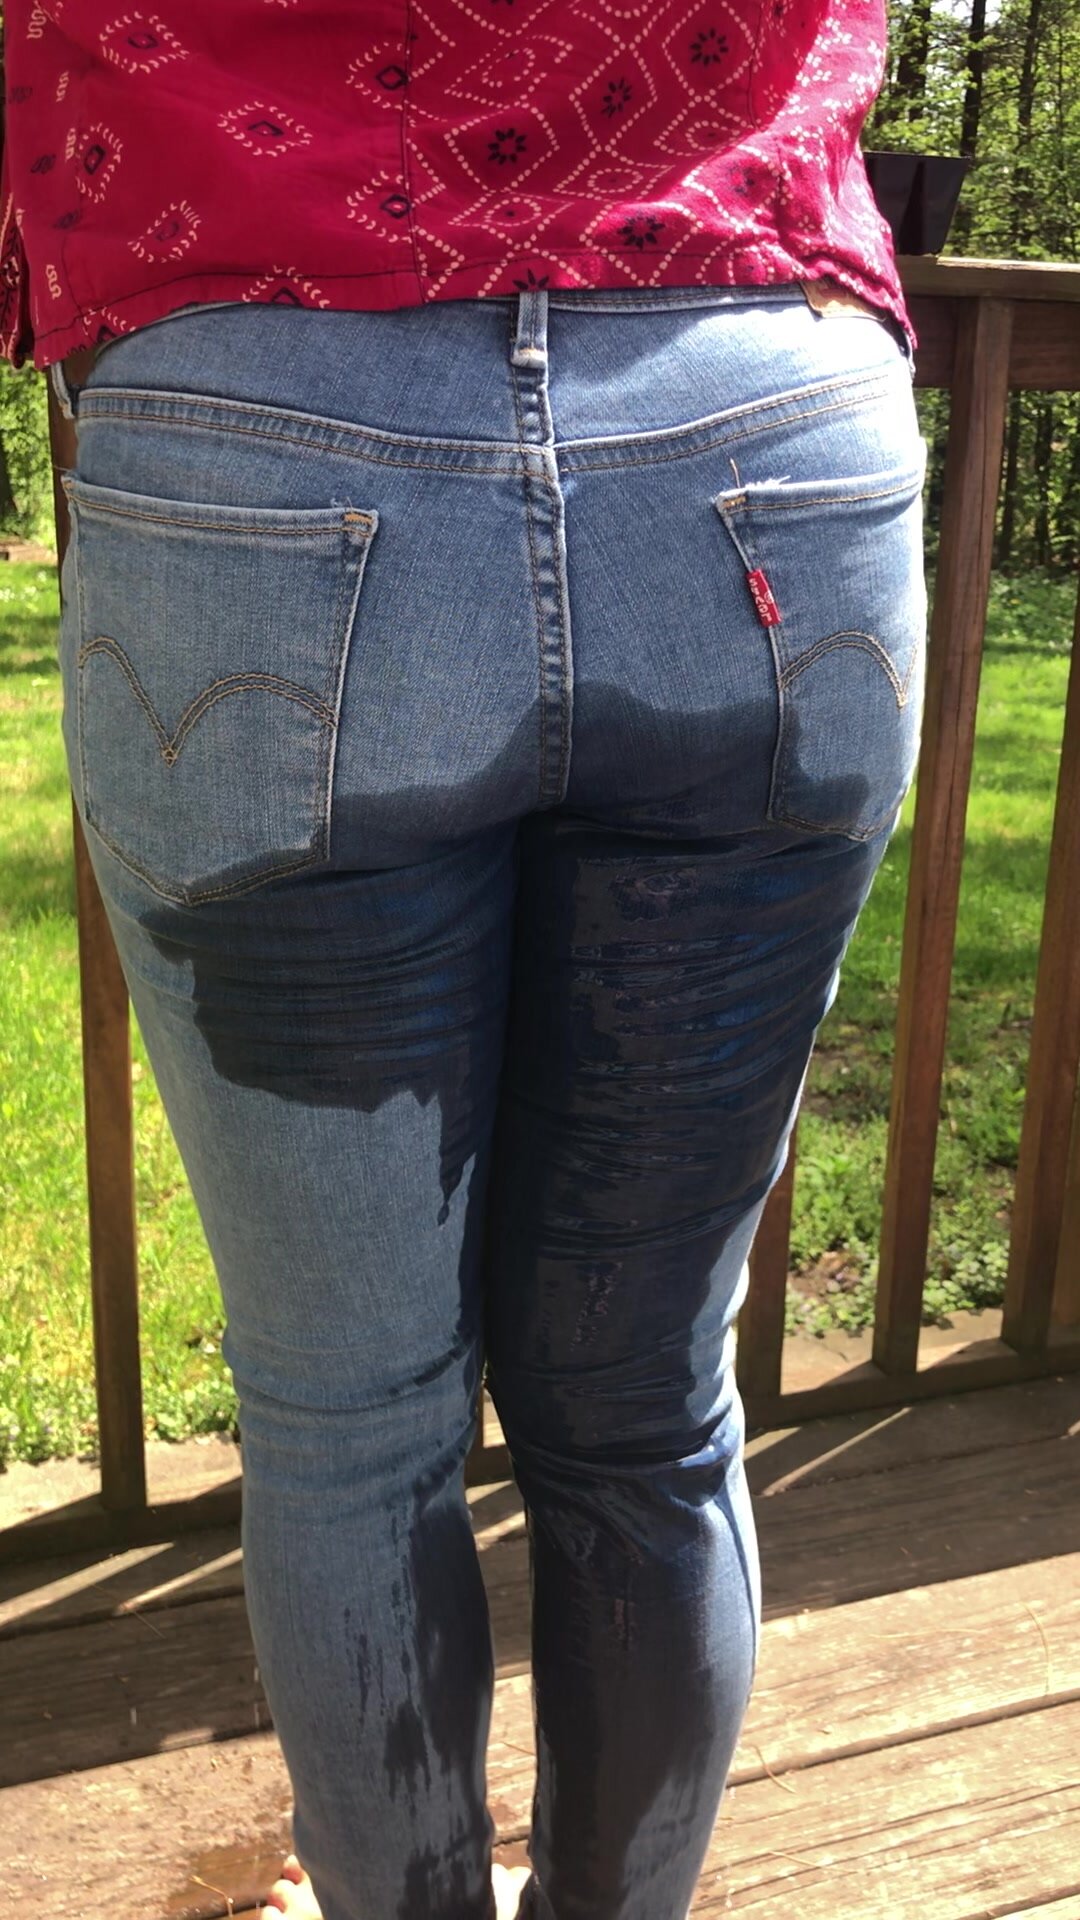 Wetting my jeans in the sun